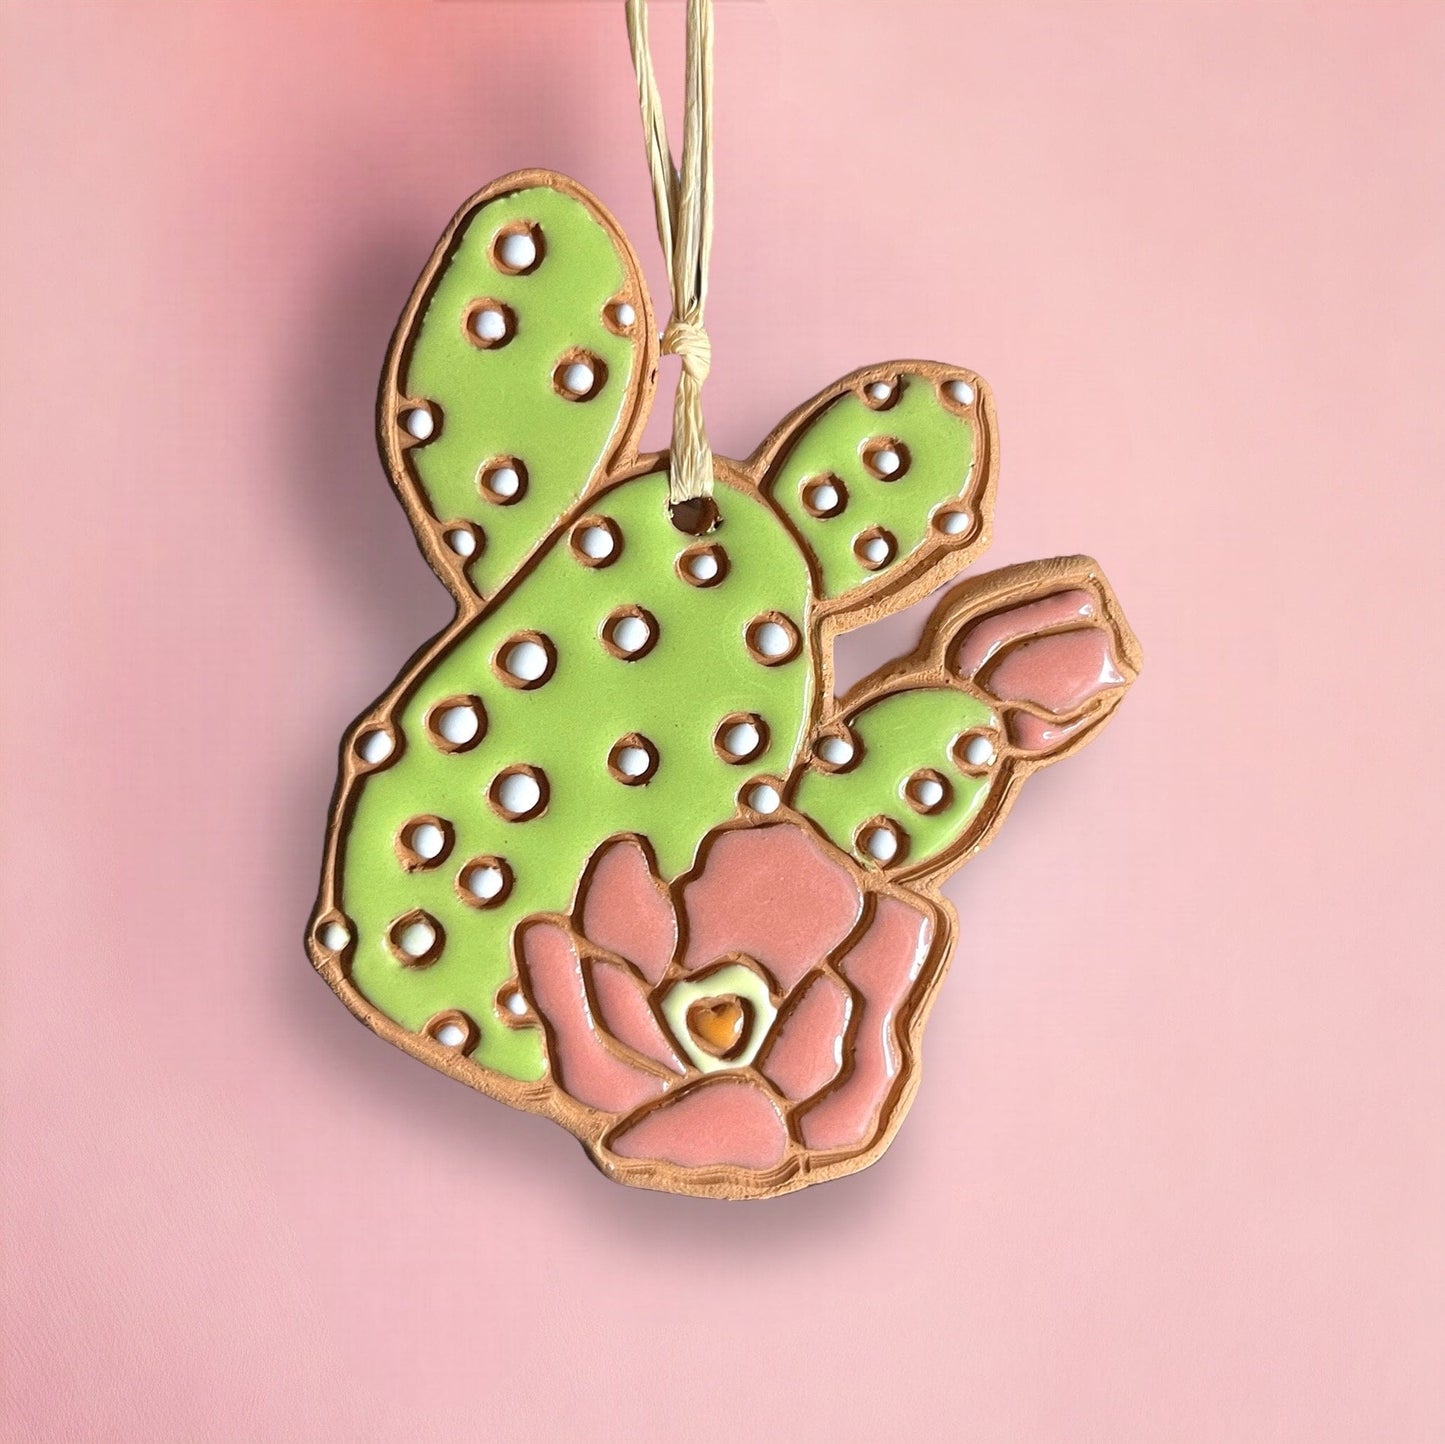 Prickly Pear Cactus & Flower Ornament